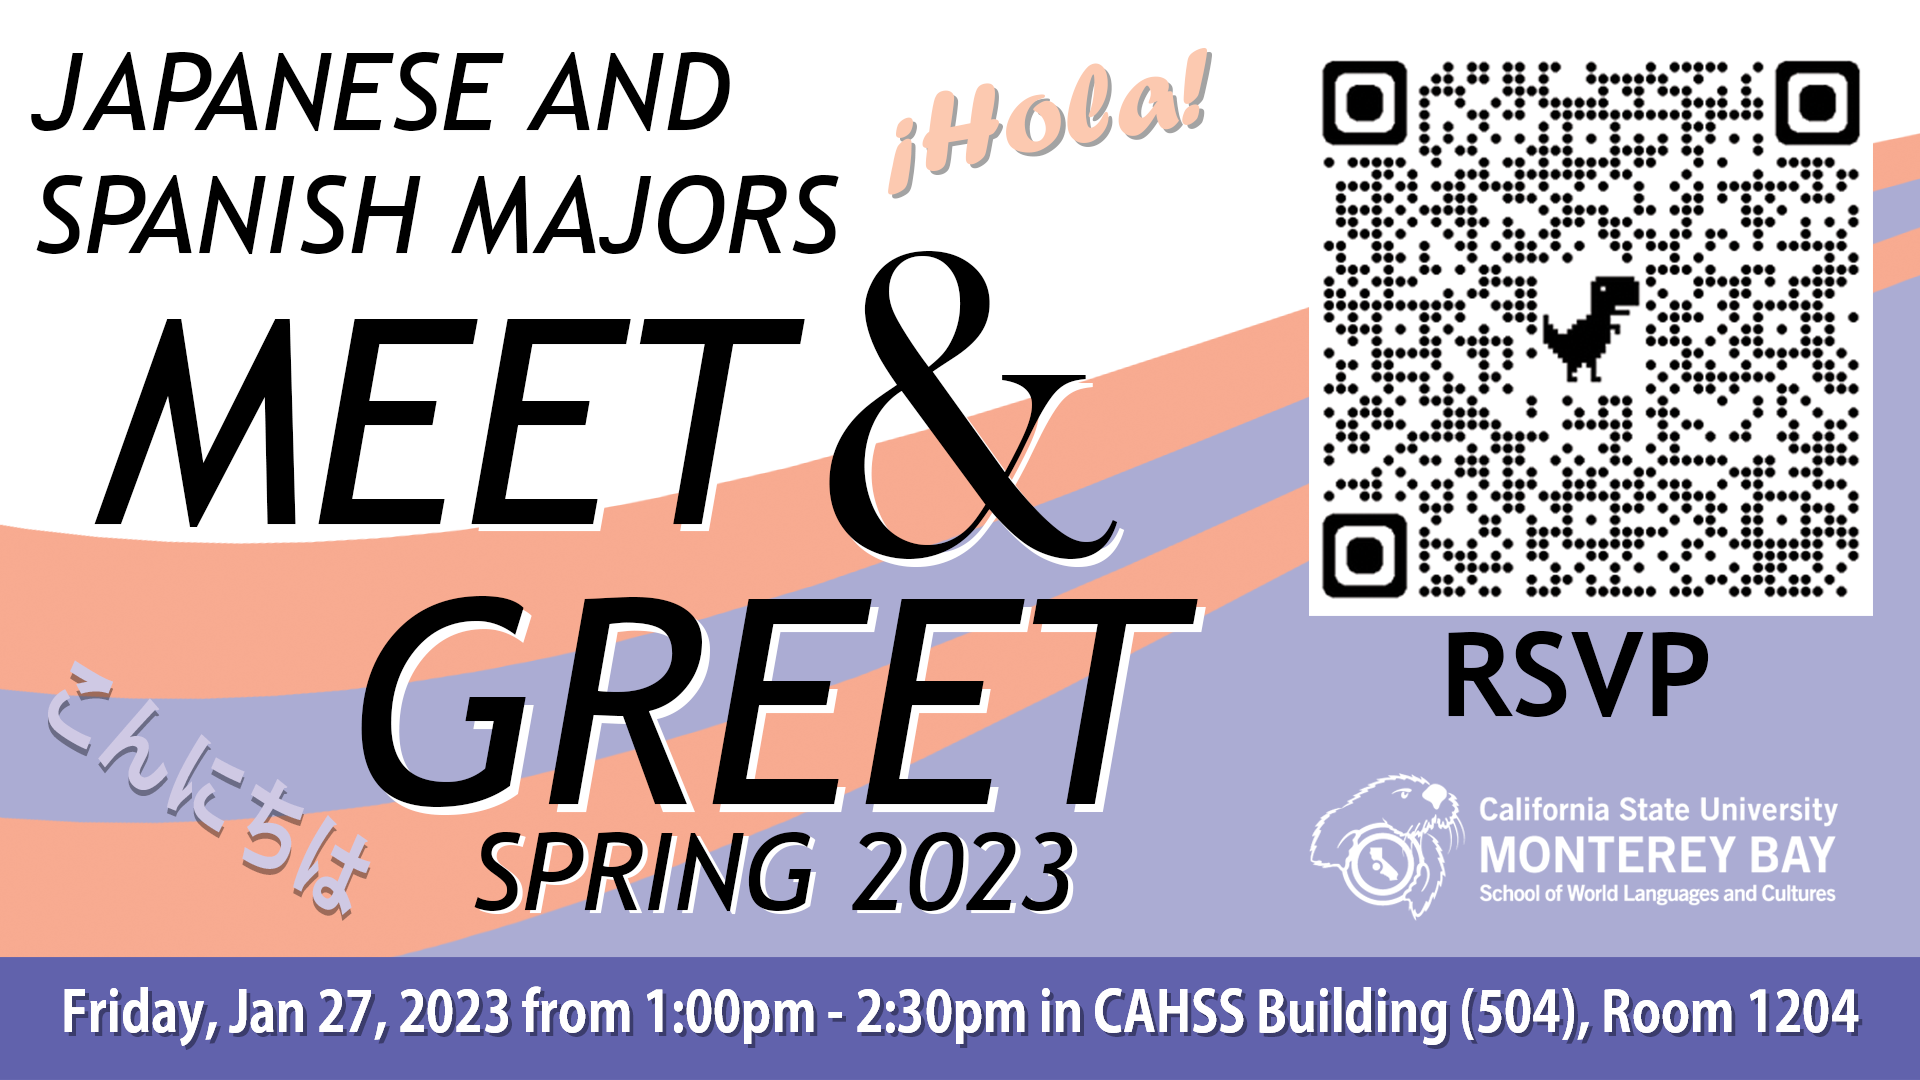 2023 WLC Major Meet and Greet event Jan 27 2023 in CAHSS 1204 1-2:30pm